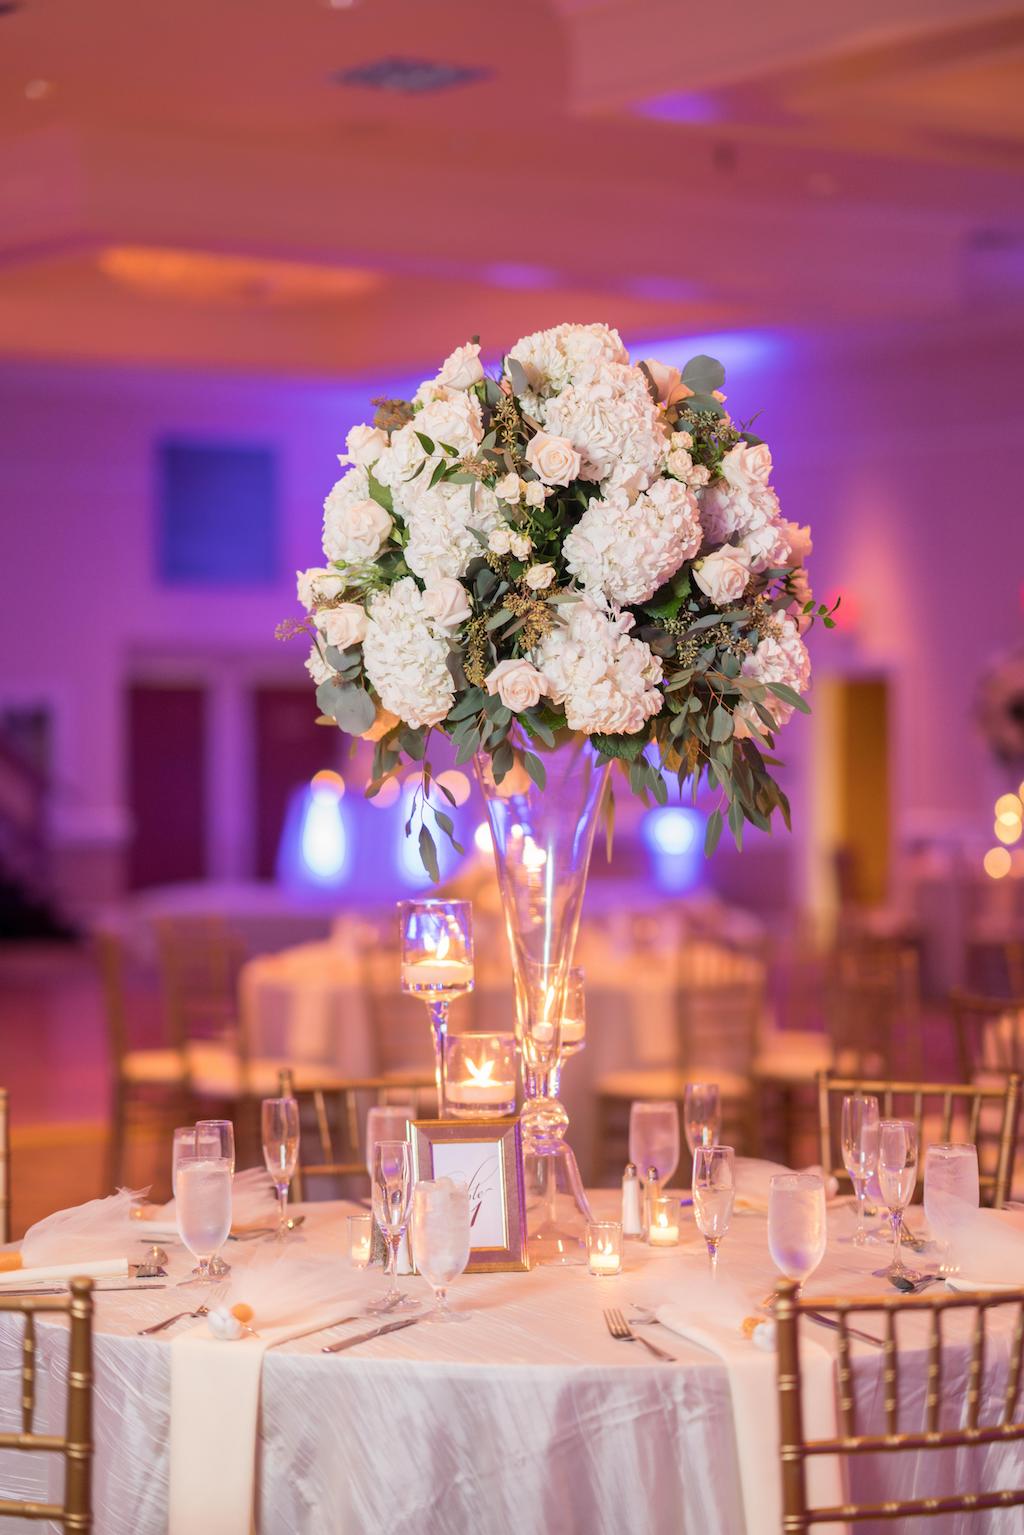 Elegant Wedding Decor at Ballroom Reception, Round Tables with White Lines, Gold Chairs, Tall Crystal Vase Centerpiece with White Flowers and Greenery, Clear Candle Votives | Tampa Bay Wedding Venue Innisbrook Golf & Spa Resort